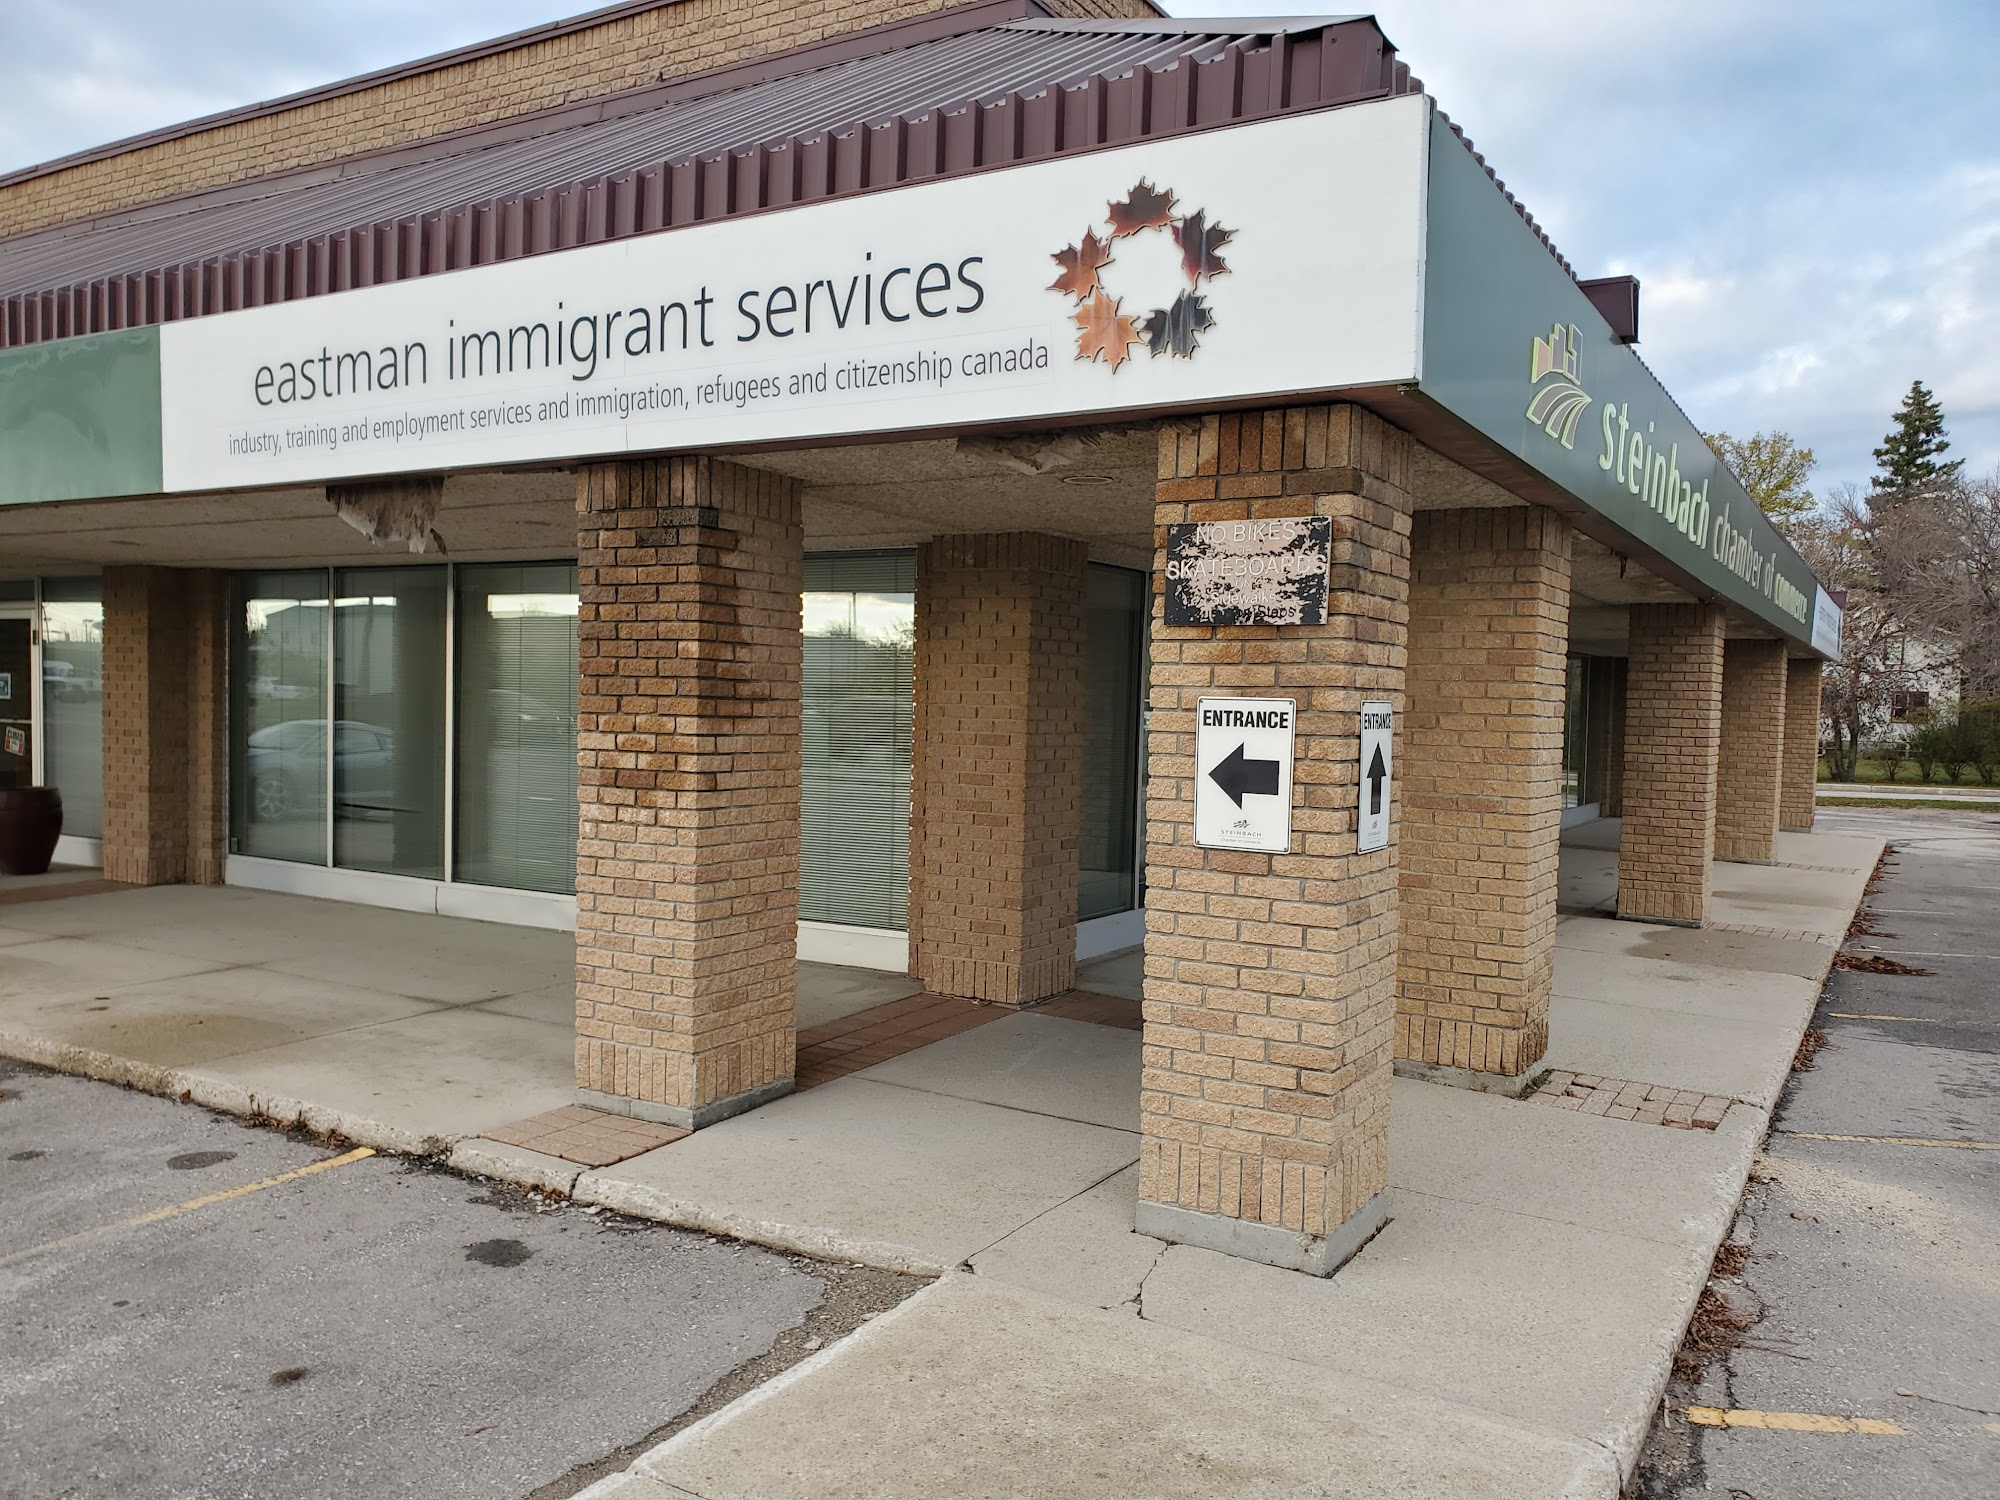 Eastman Immigrant Services 284 Reimer Ave, Steinbach Manitoba R5G 0R5